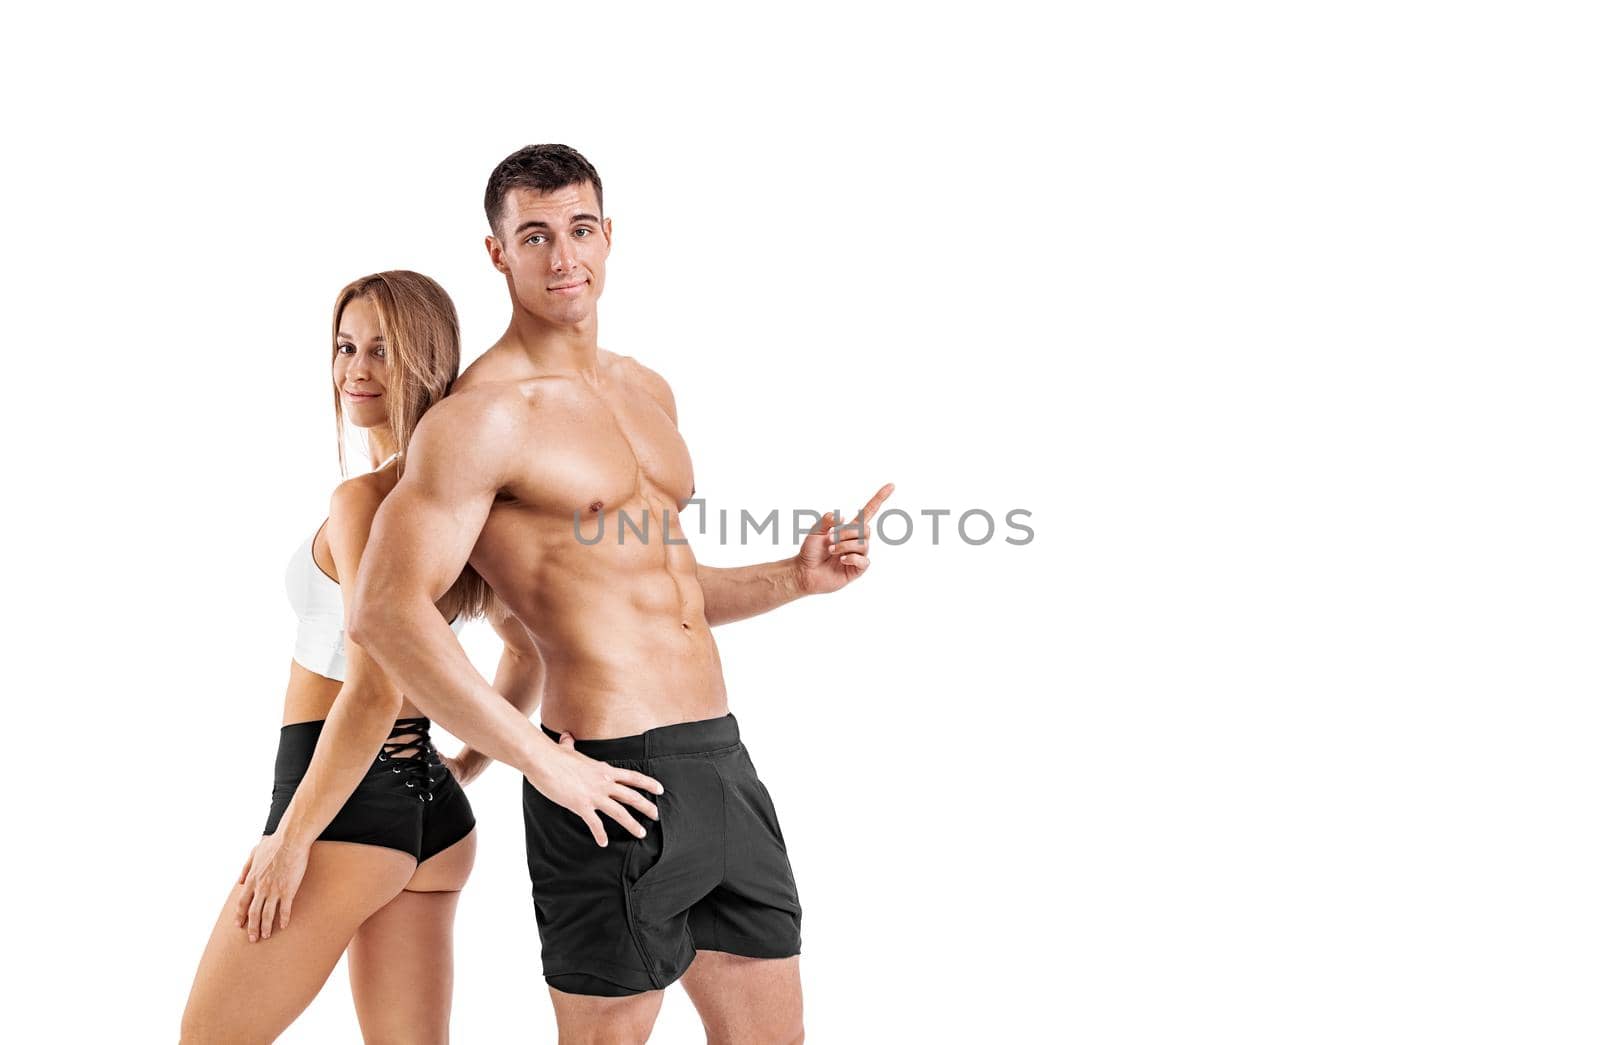 Fit couple at the gym shows on copy space isolated on white background . Fitness concept. Healthy life style. Mr and Mrs Fitness